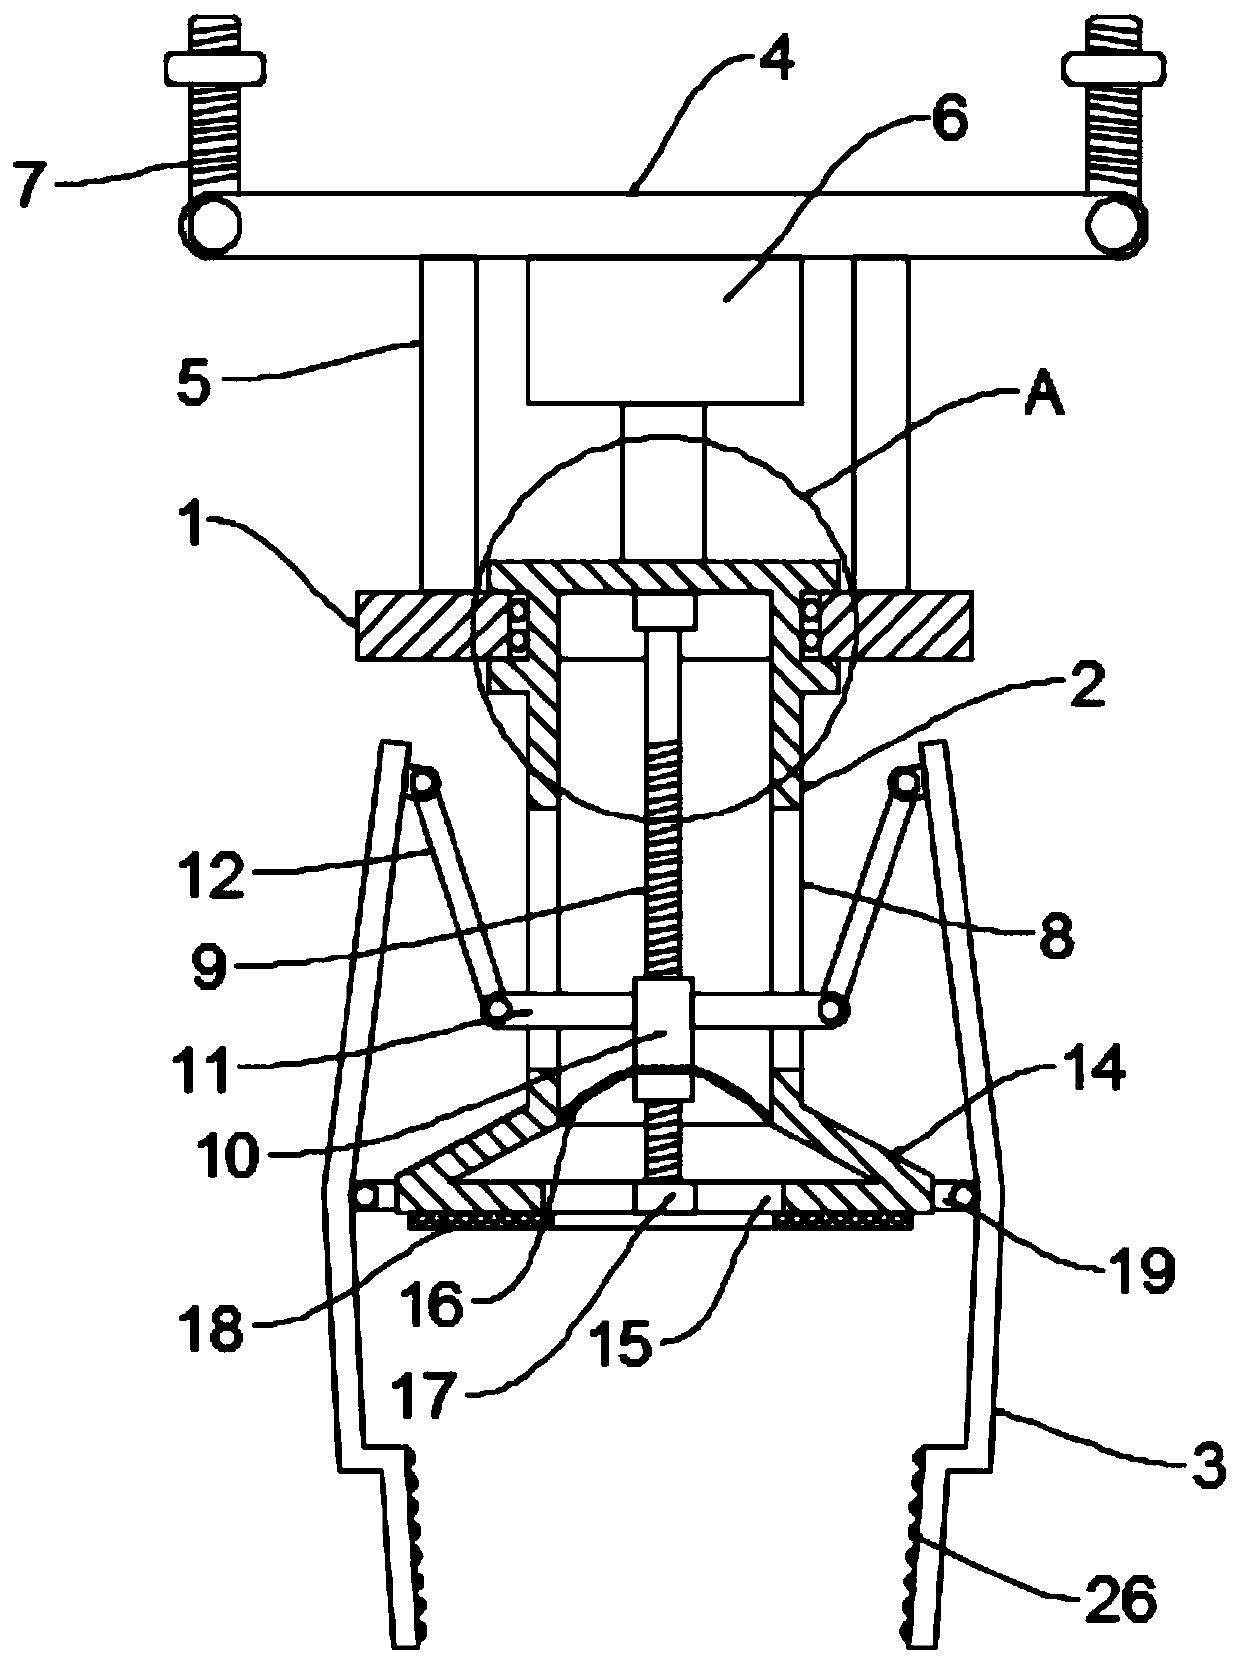 Clamping component structure of industrial robot